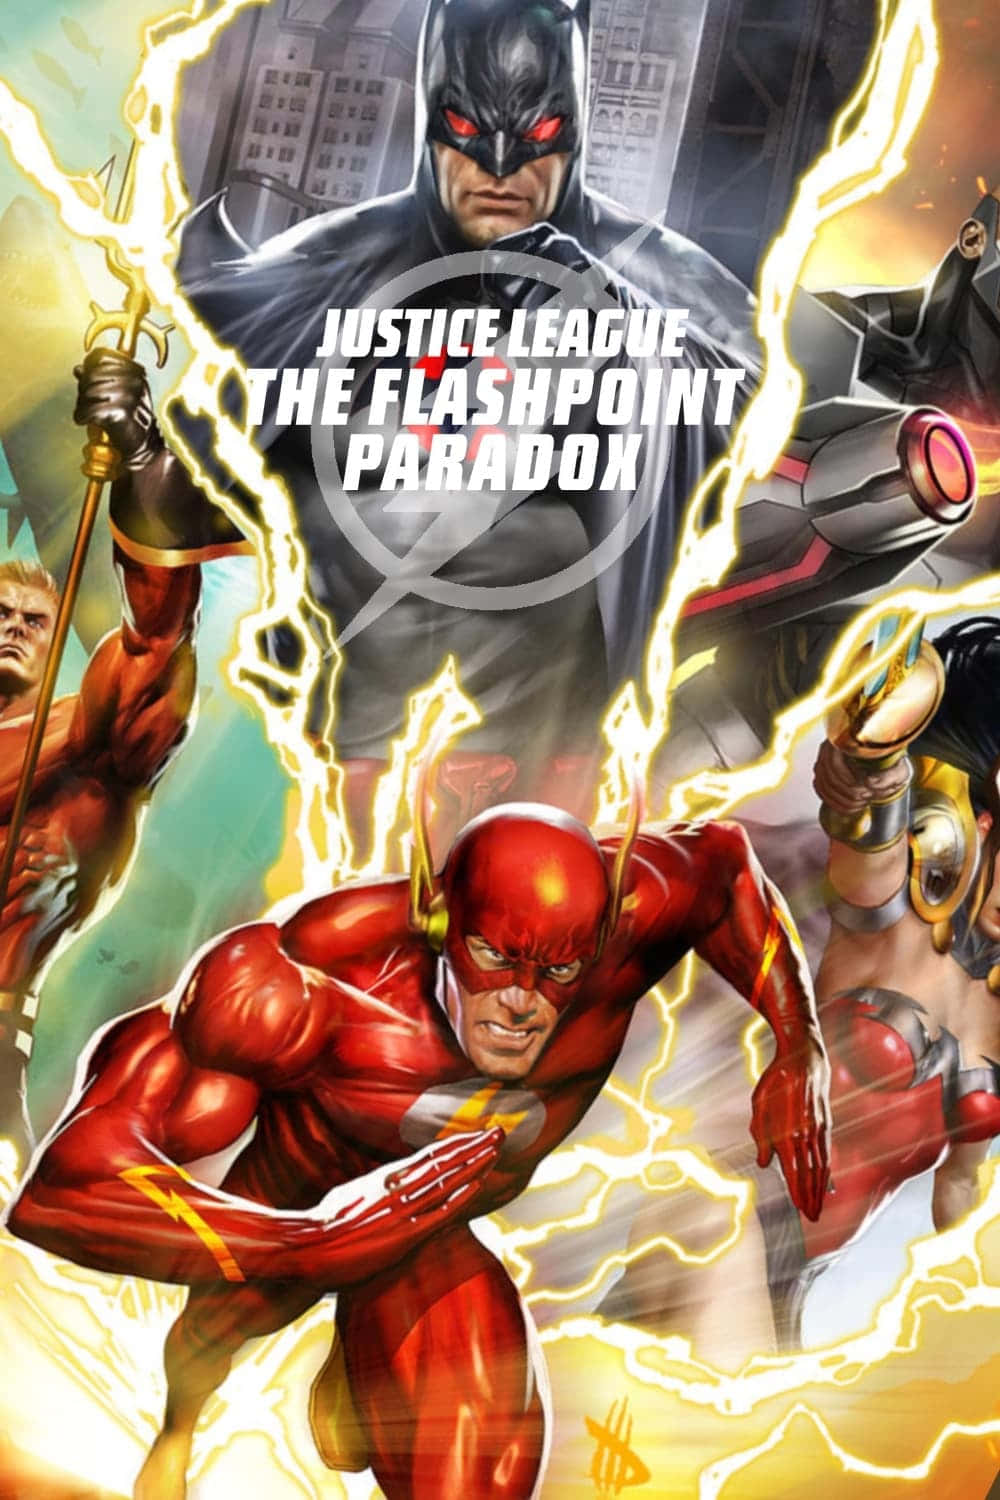 The Flash with the Justice League in the Flashpoint Paradox Wallpaper